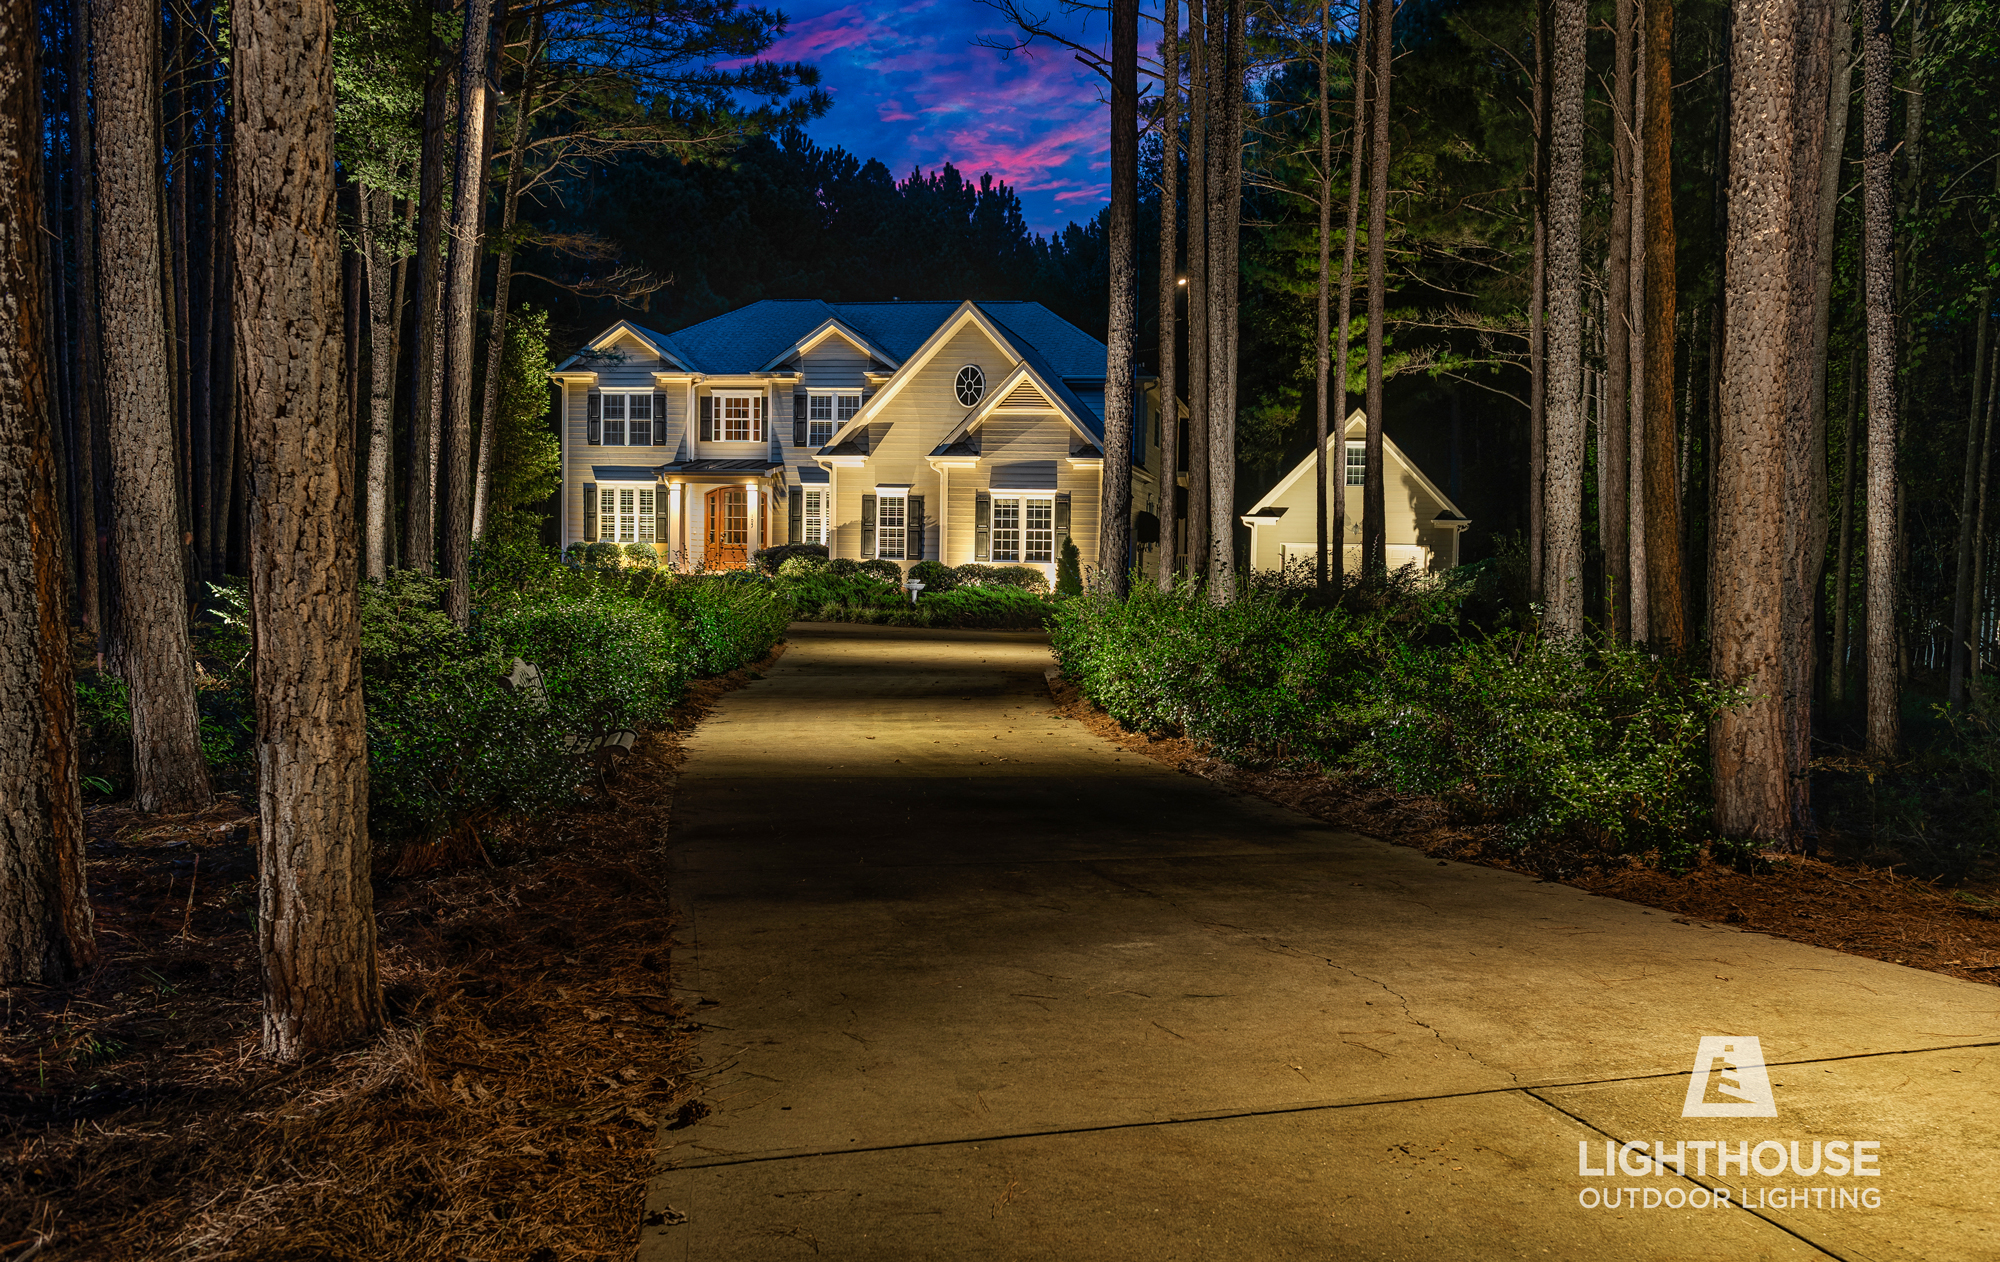 Driveway lighting in West Chester, PA